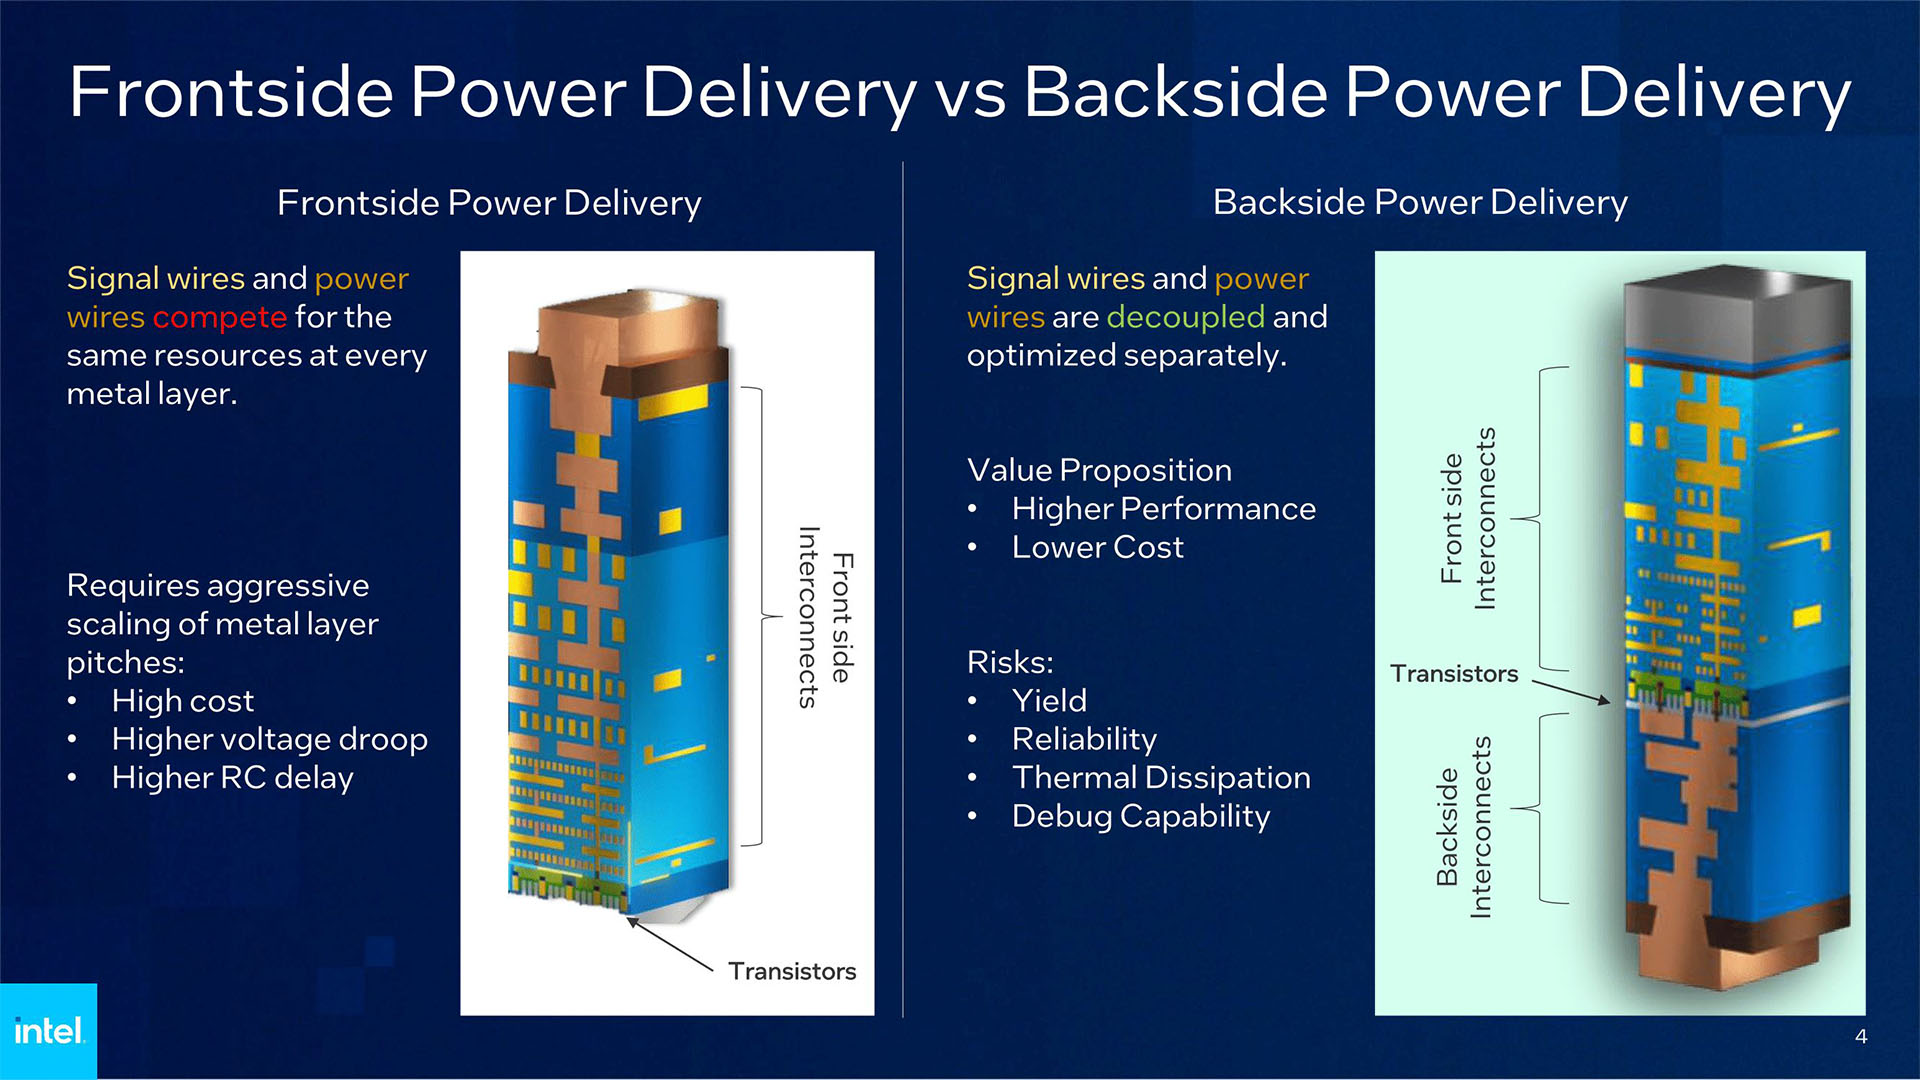 Intel PowerVia backside power delivery 03